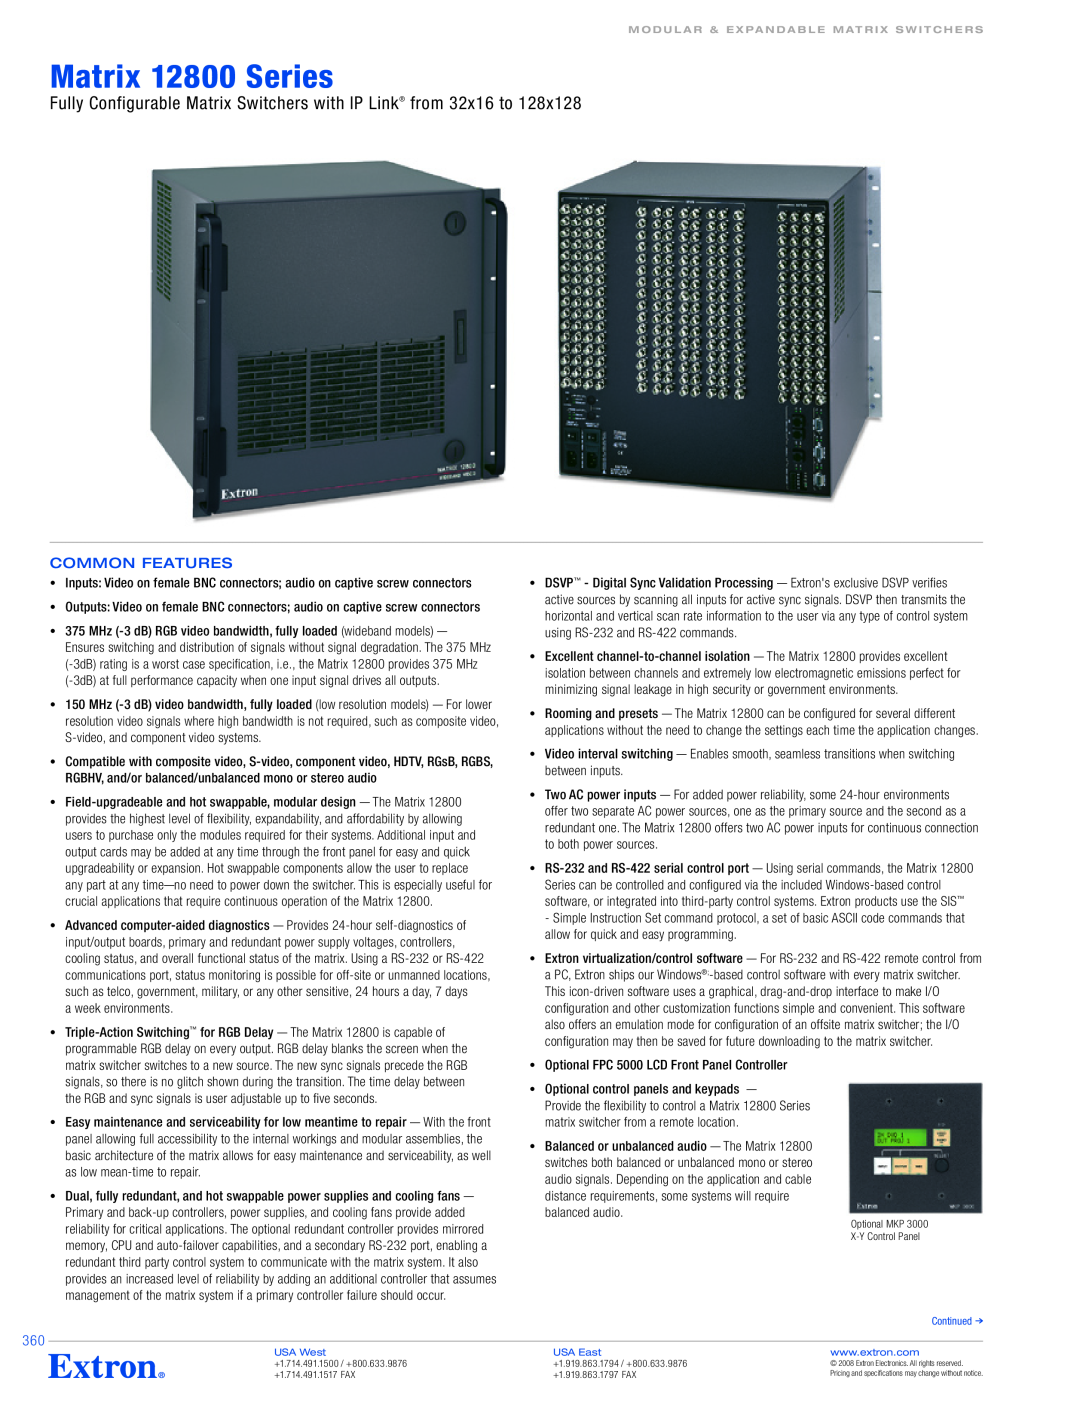 Extron electronic Matrix 12800 Series specifications Fully Configurable Matrix Switchers with IP Link from 32x16 to 